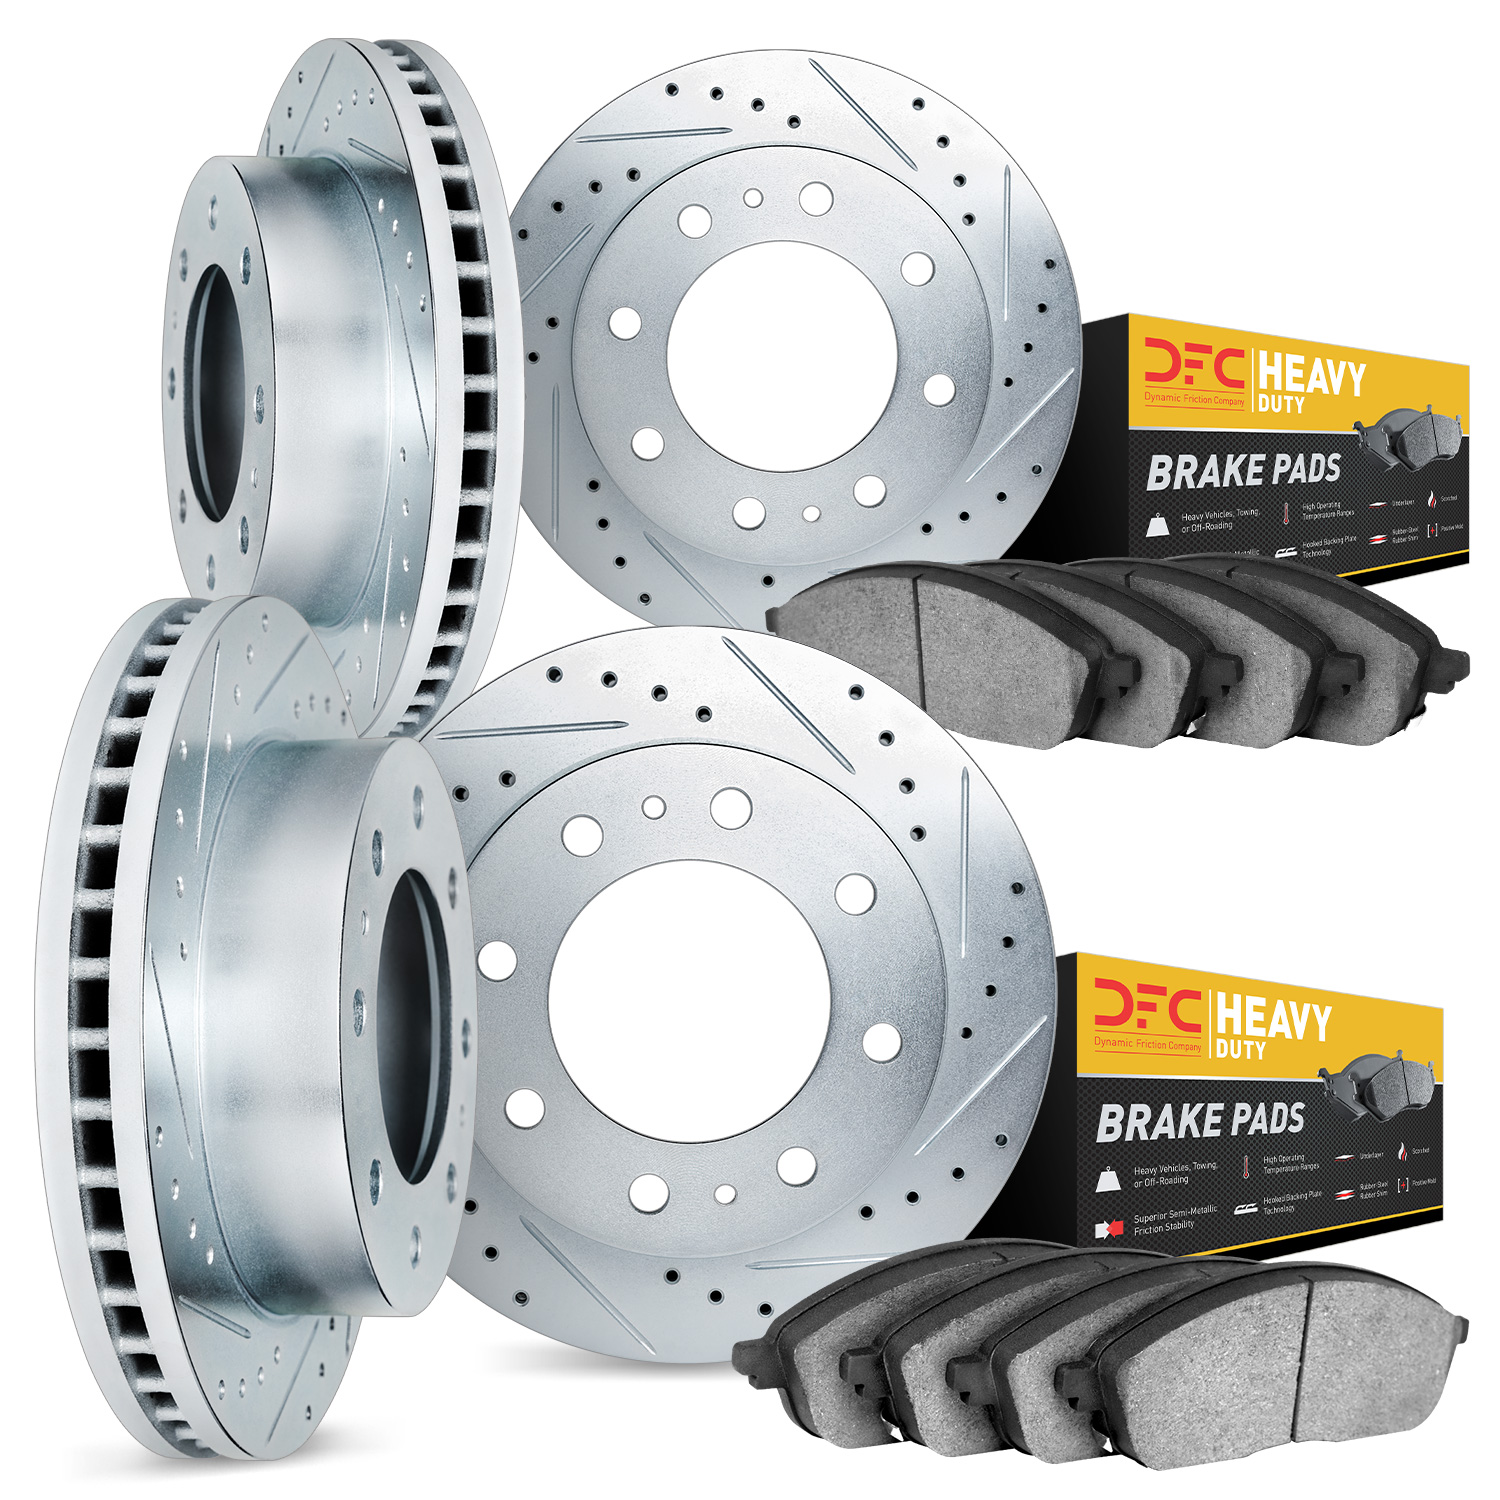 7204-40219 Drilled/Slotted Rotors w/Heavy-Duty Brake Pads Kit [Silver], 2000-2002 Mopar, Position: Front and Rear